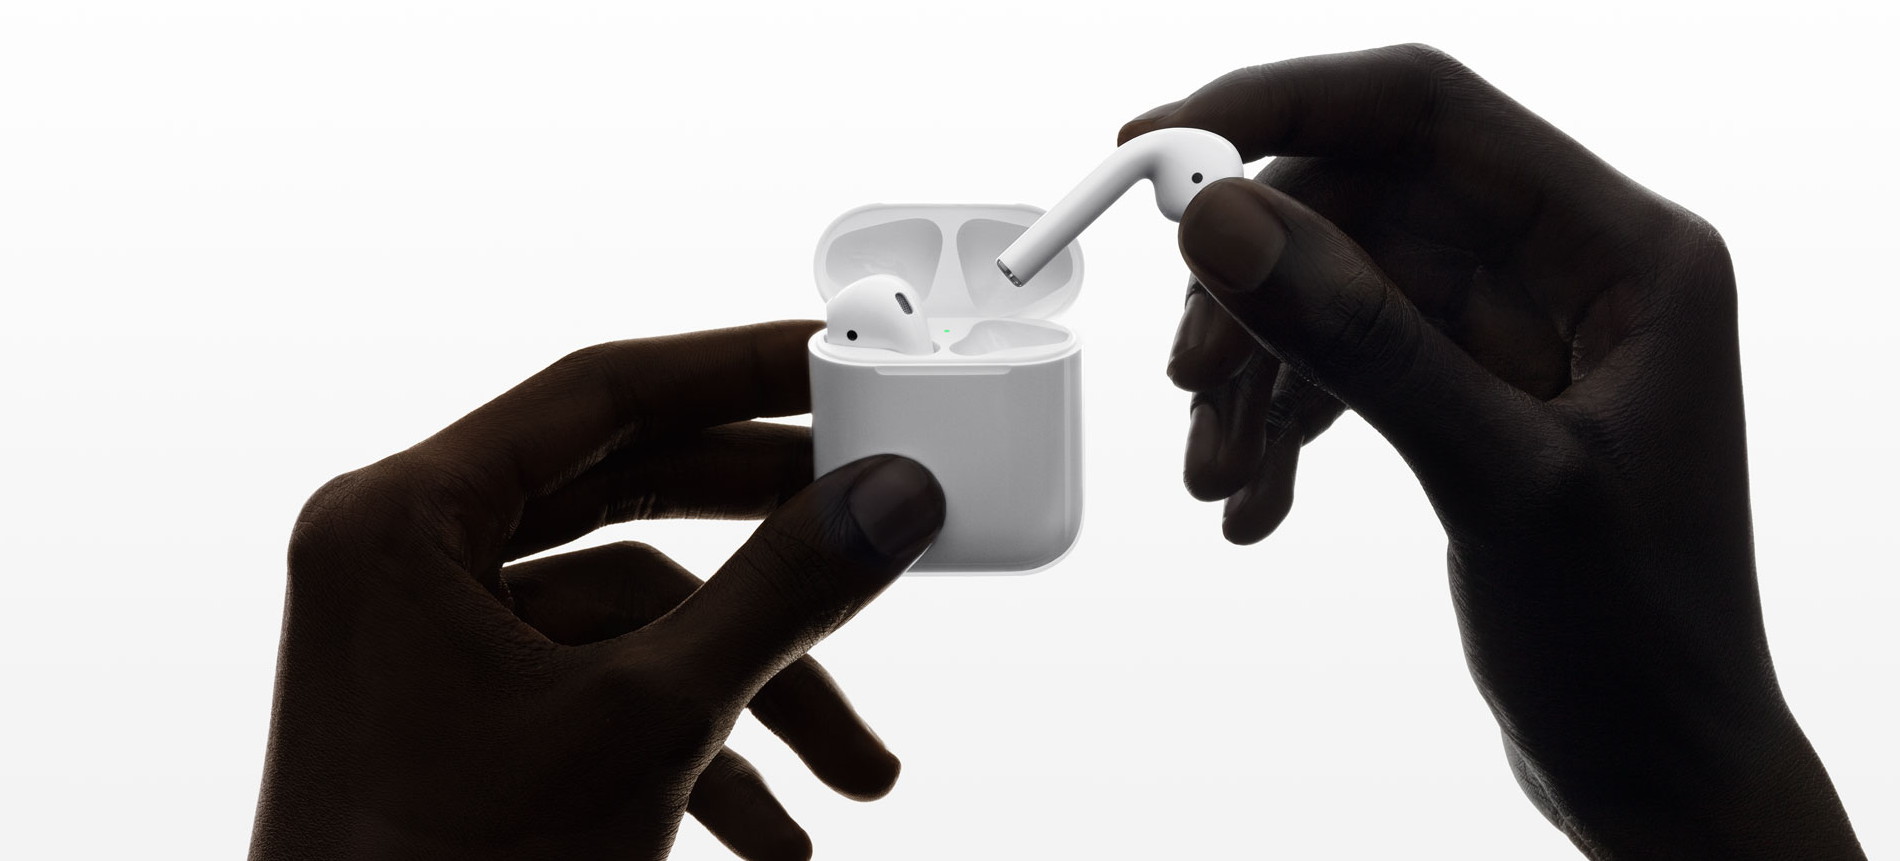 Apple_AirPods_2nd_Gen_with_Lightning_Charging_Case_24_hour_battery_life._sold_by_Technomobi